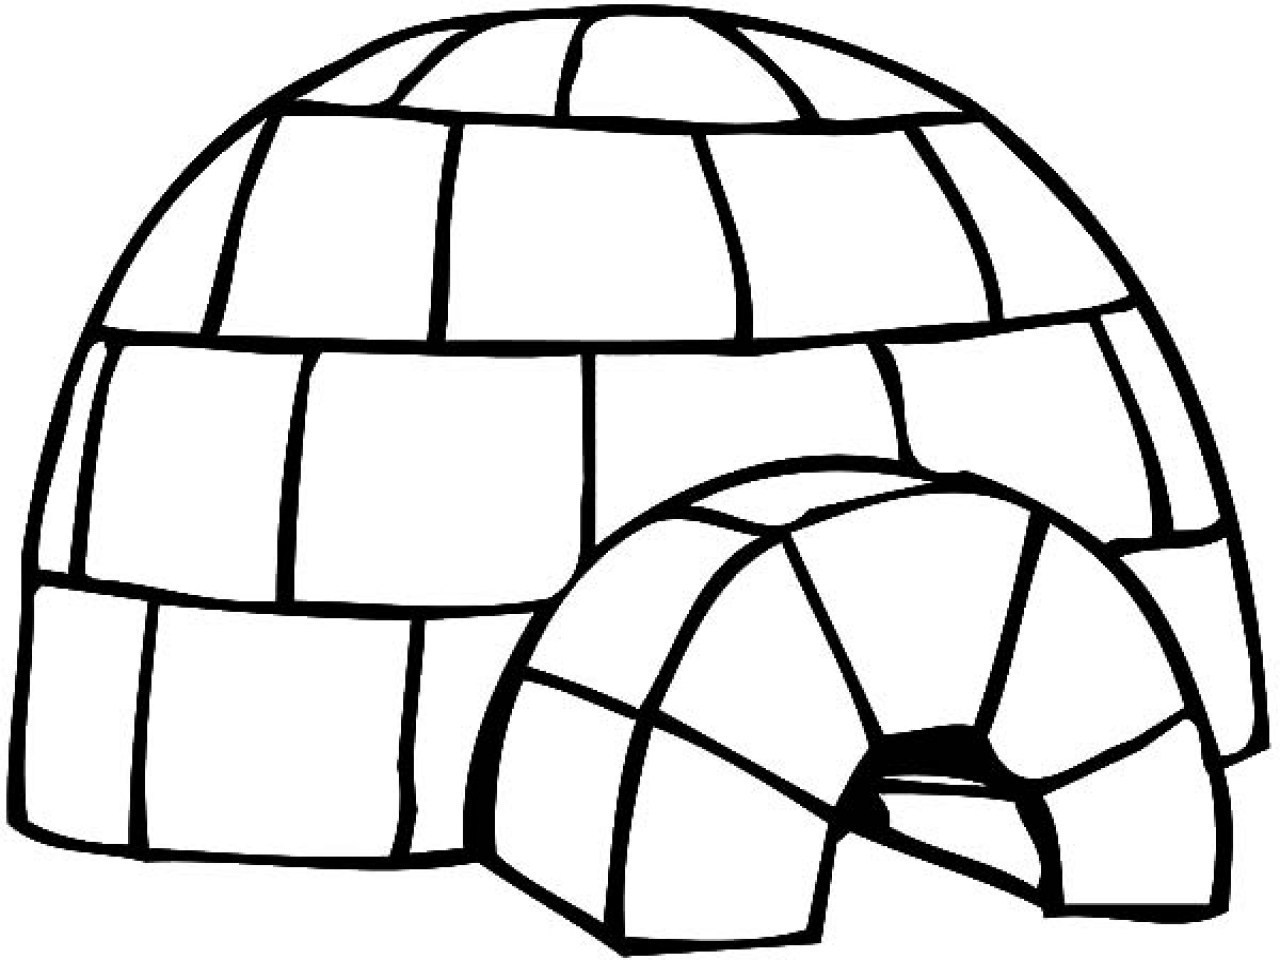 Coloring Pages : Free Iglooing Page With Books Disney On Ice I Is For Kids  Cube Images Laser That Shoots Extraordinary Igloo Coloring Page Photo Ideas  ~ Off-The Wall ATL